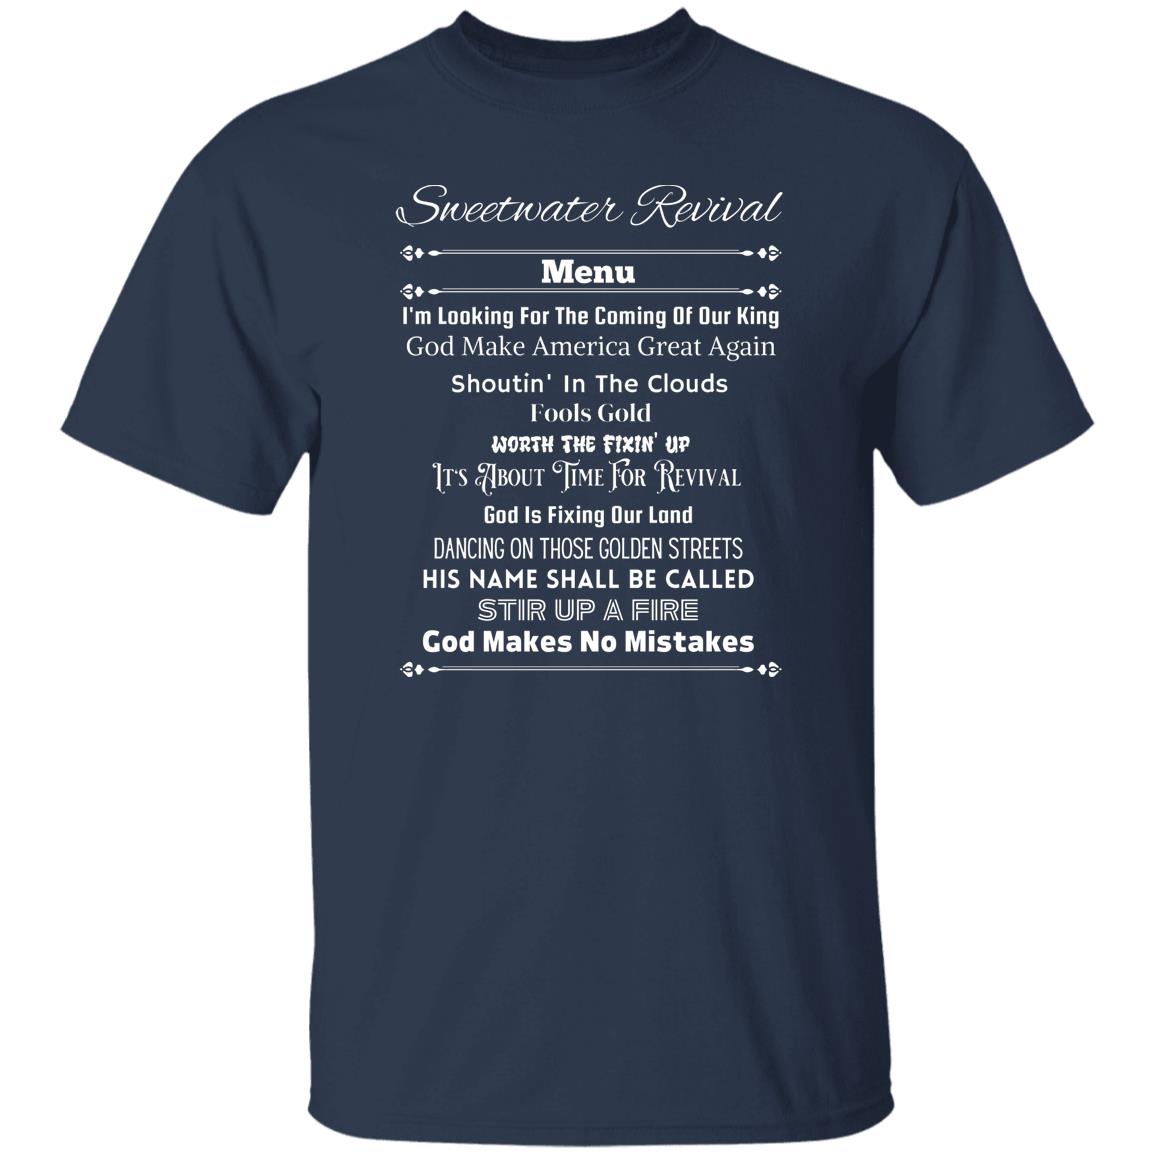 Sweetwater Revival Songs T-Shirt